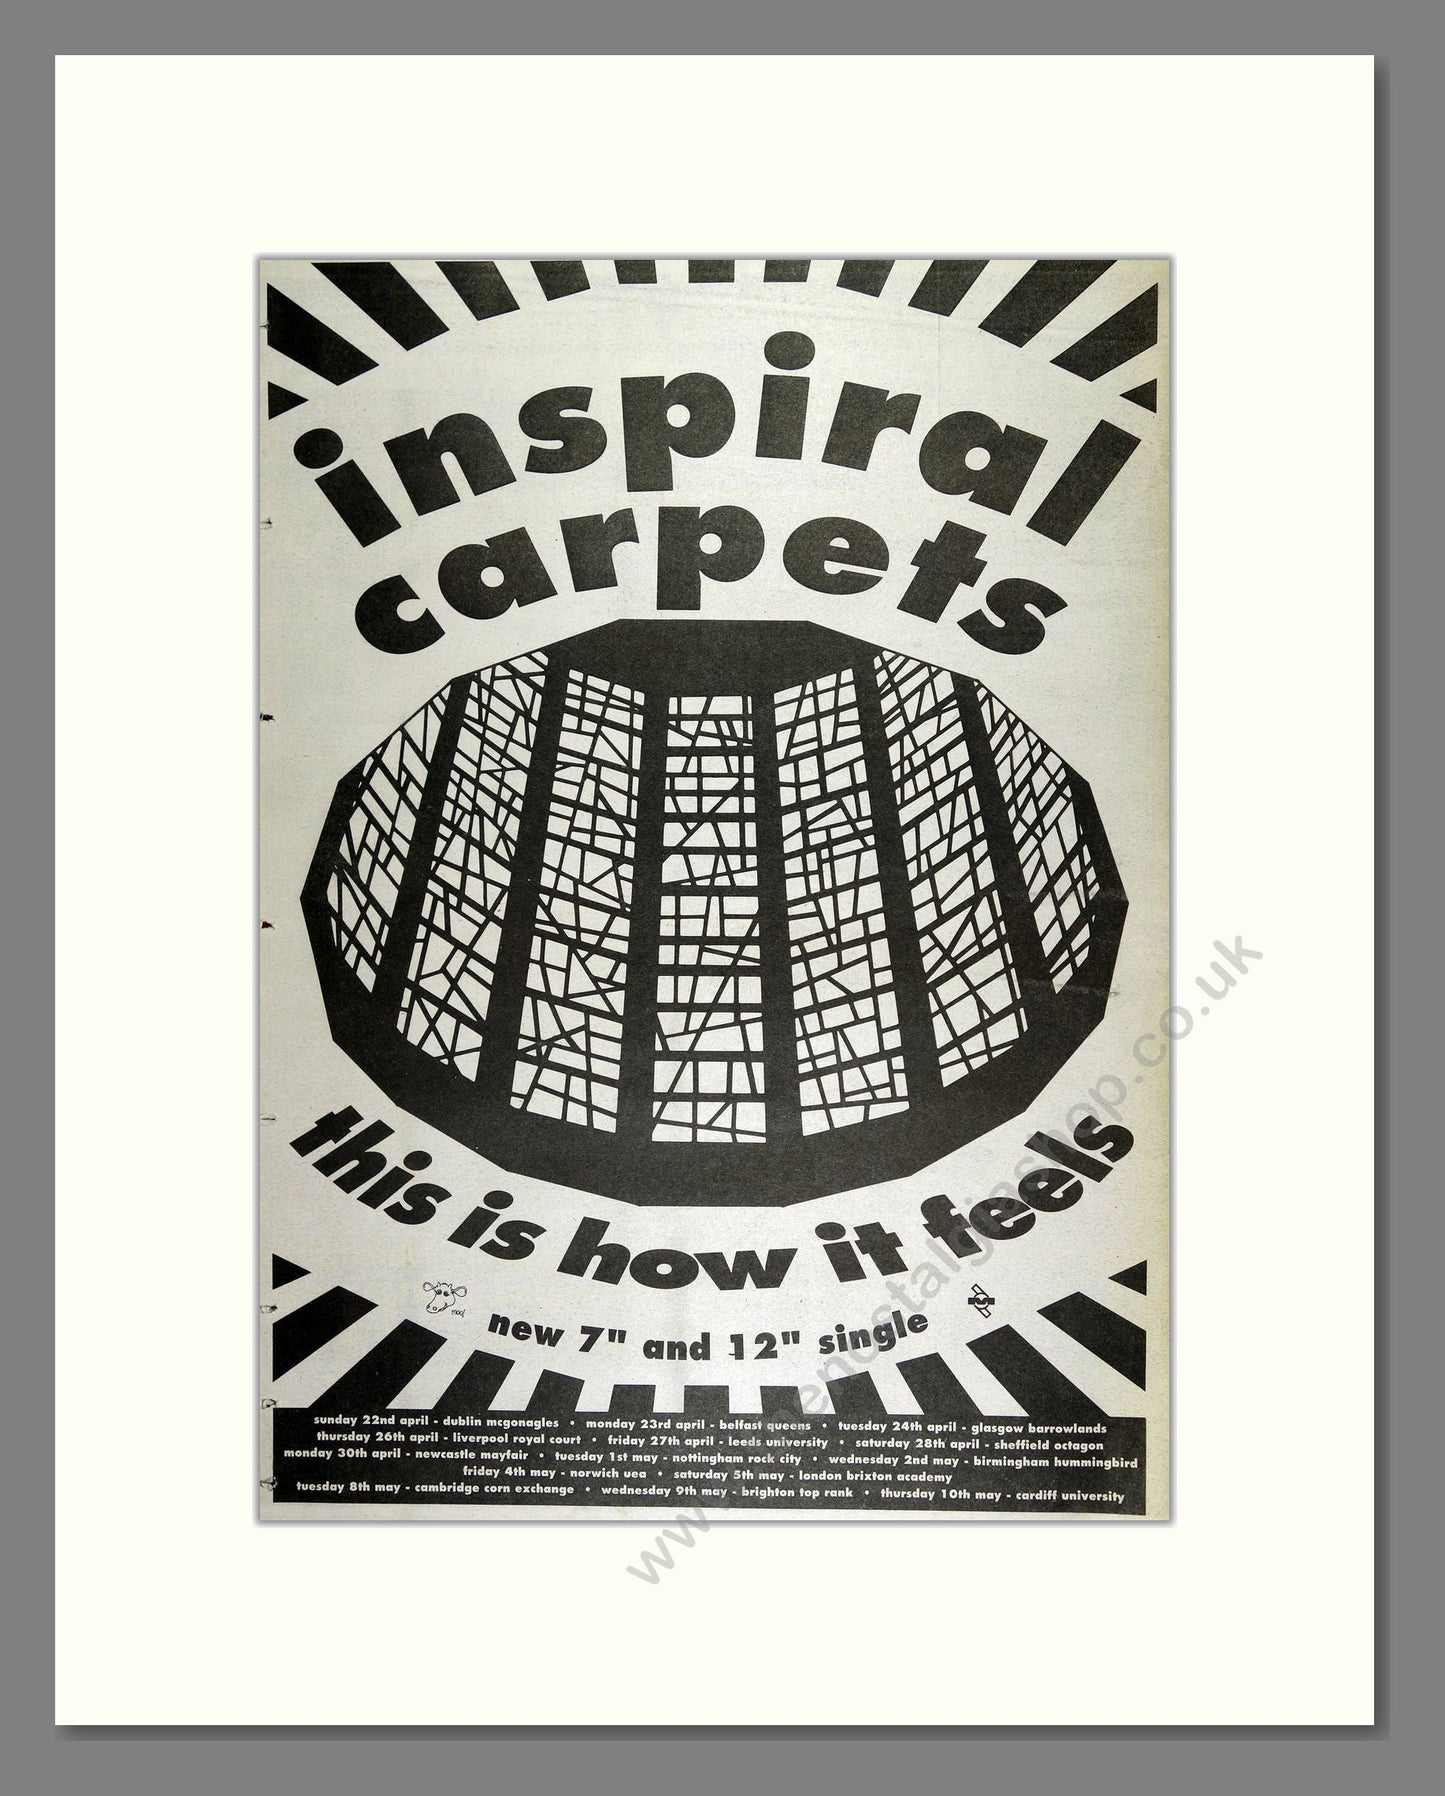 Inspiral Carpets - This is How it Feels. Vintage Advert 1990 (ref AD16434)